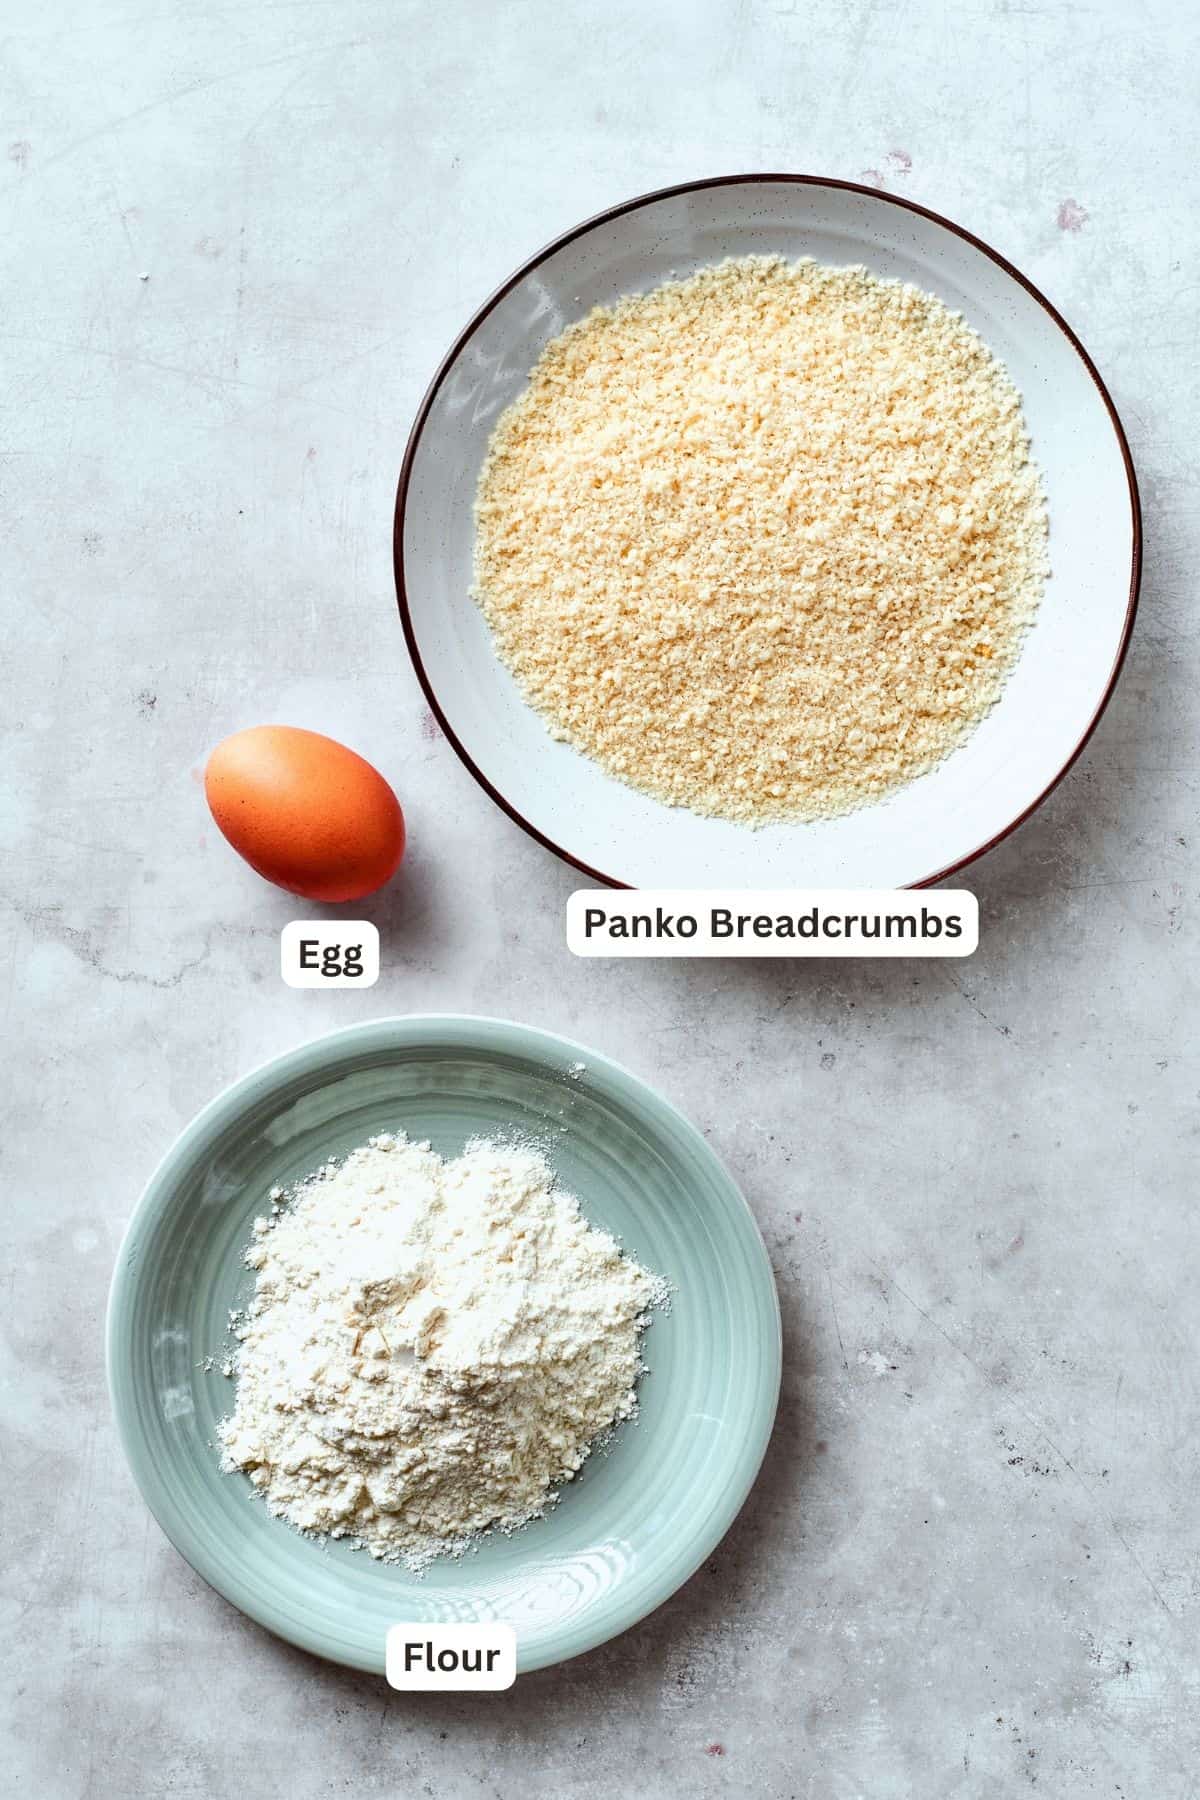 The breading to make shrimp burgers is shown portioned out an labelled: panko bread crumbs, flour, egg.